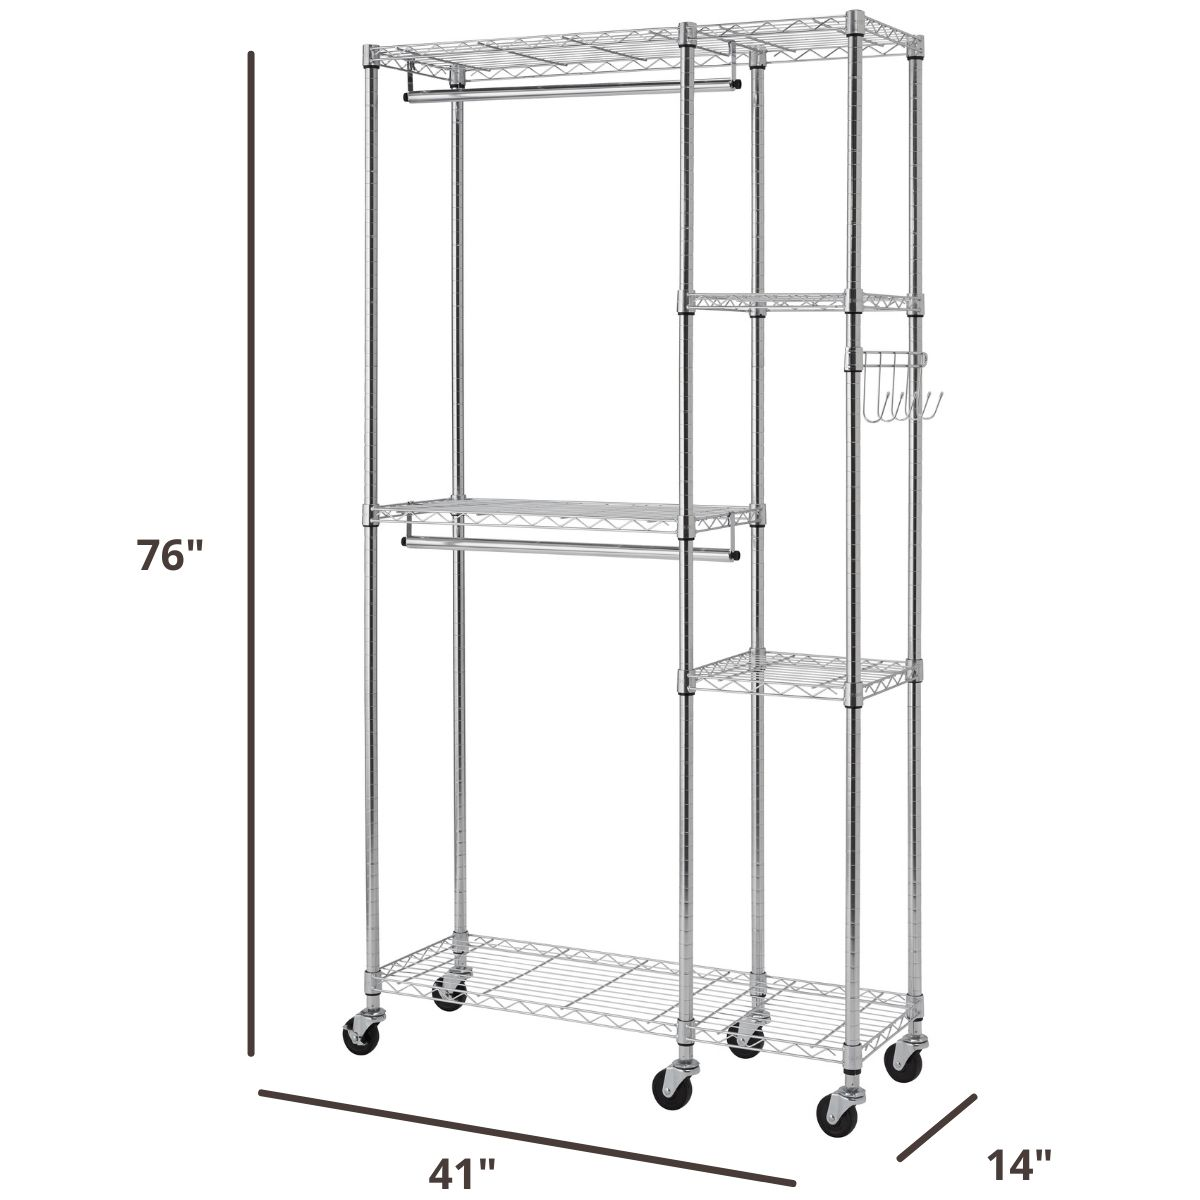 41 inches wide rolling garment rack